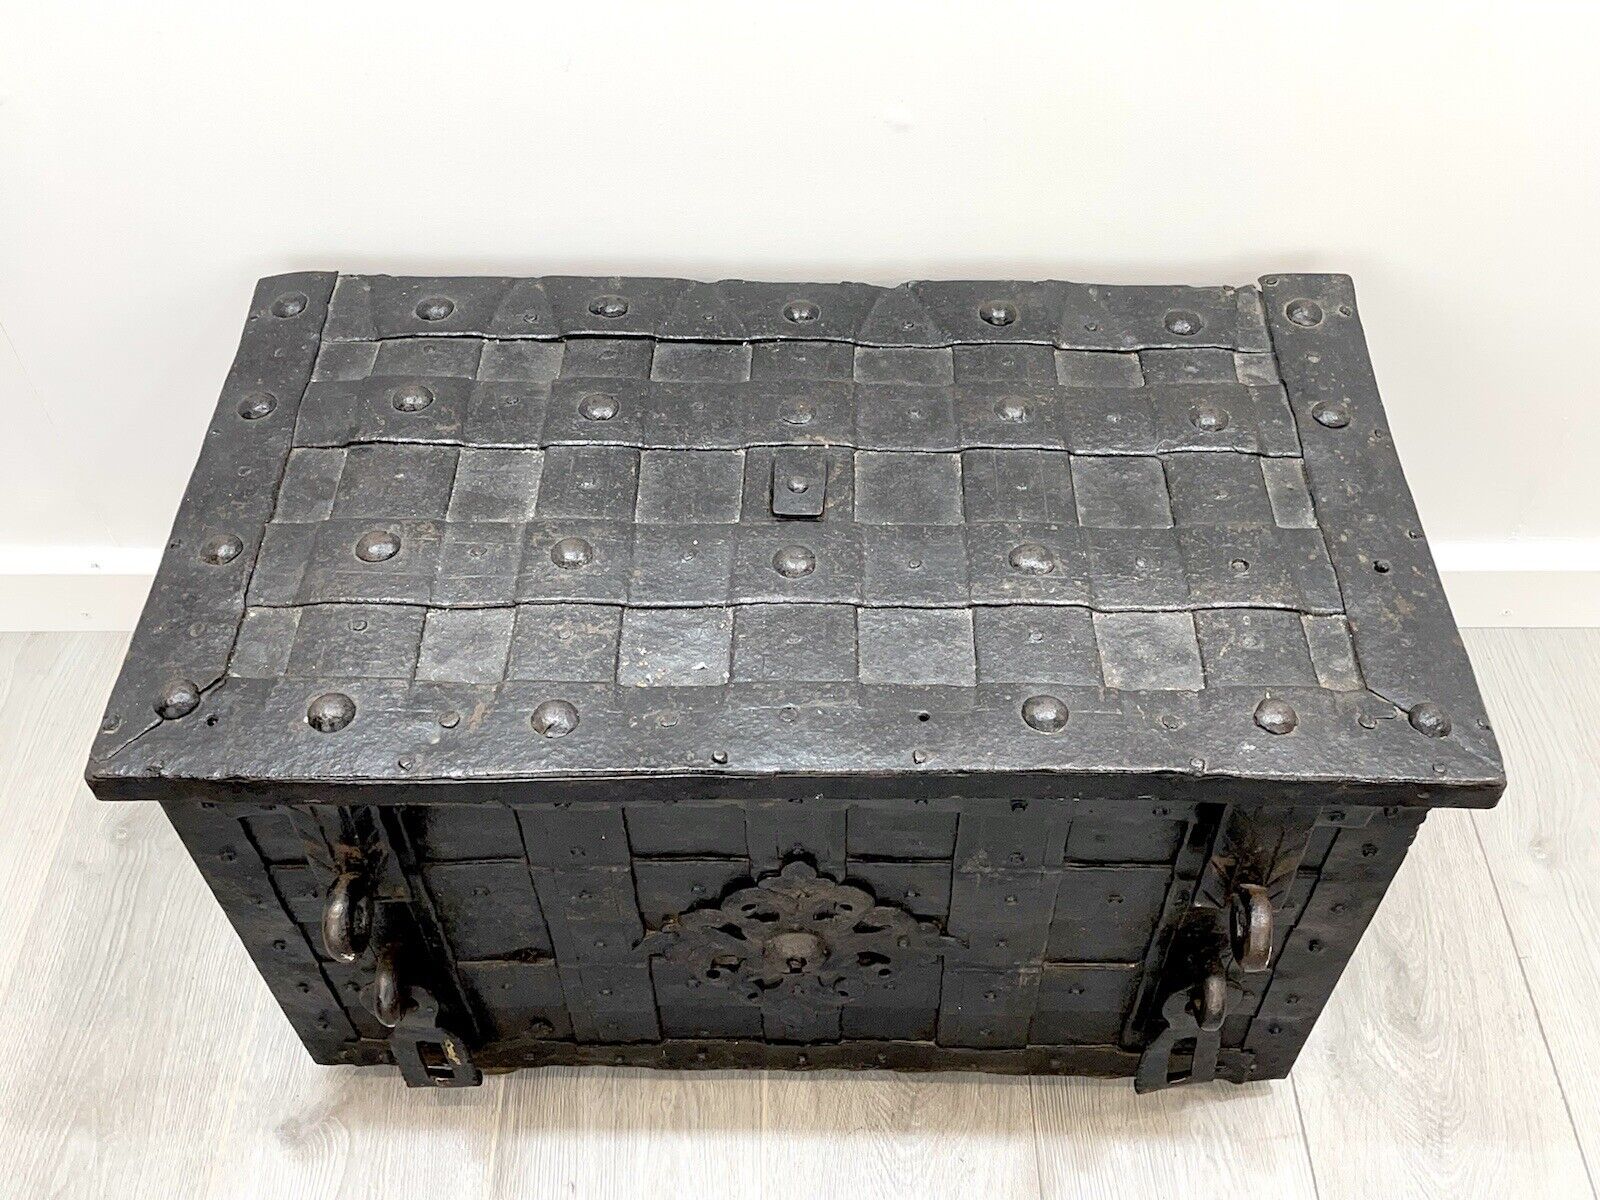 17th Century, Wrought Iron Strong Box / Armada Chest